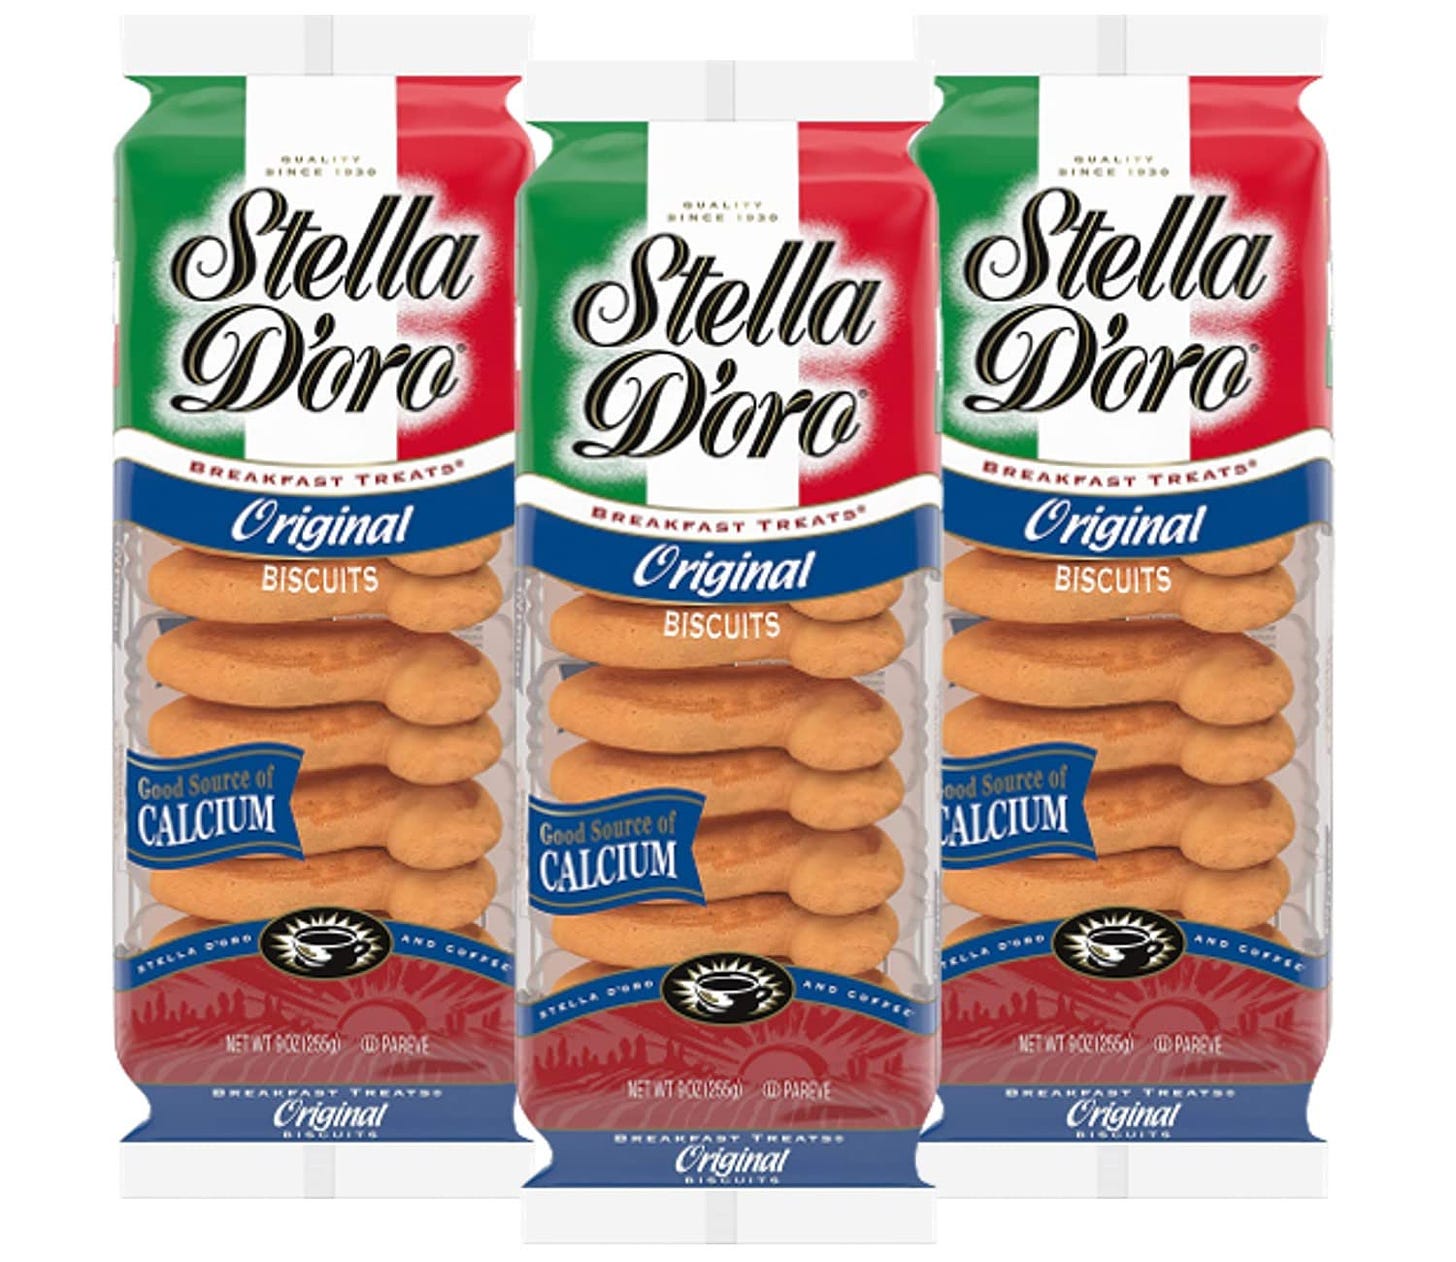 Three enticing packages of Stella D'oro Original Biscuits. The green, white, and red colors of the Italian flag adorn the top of each package.